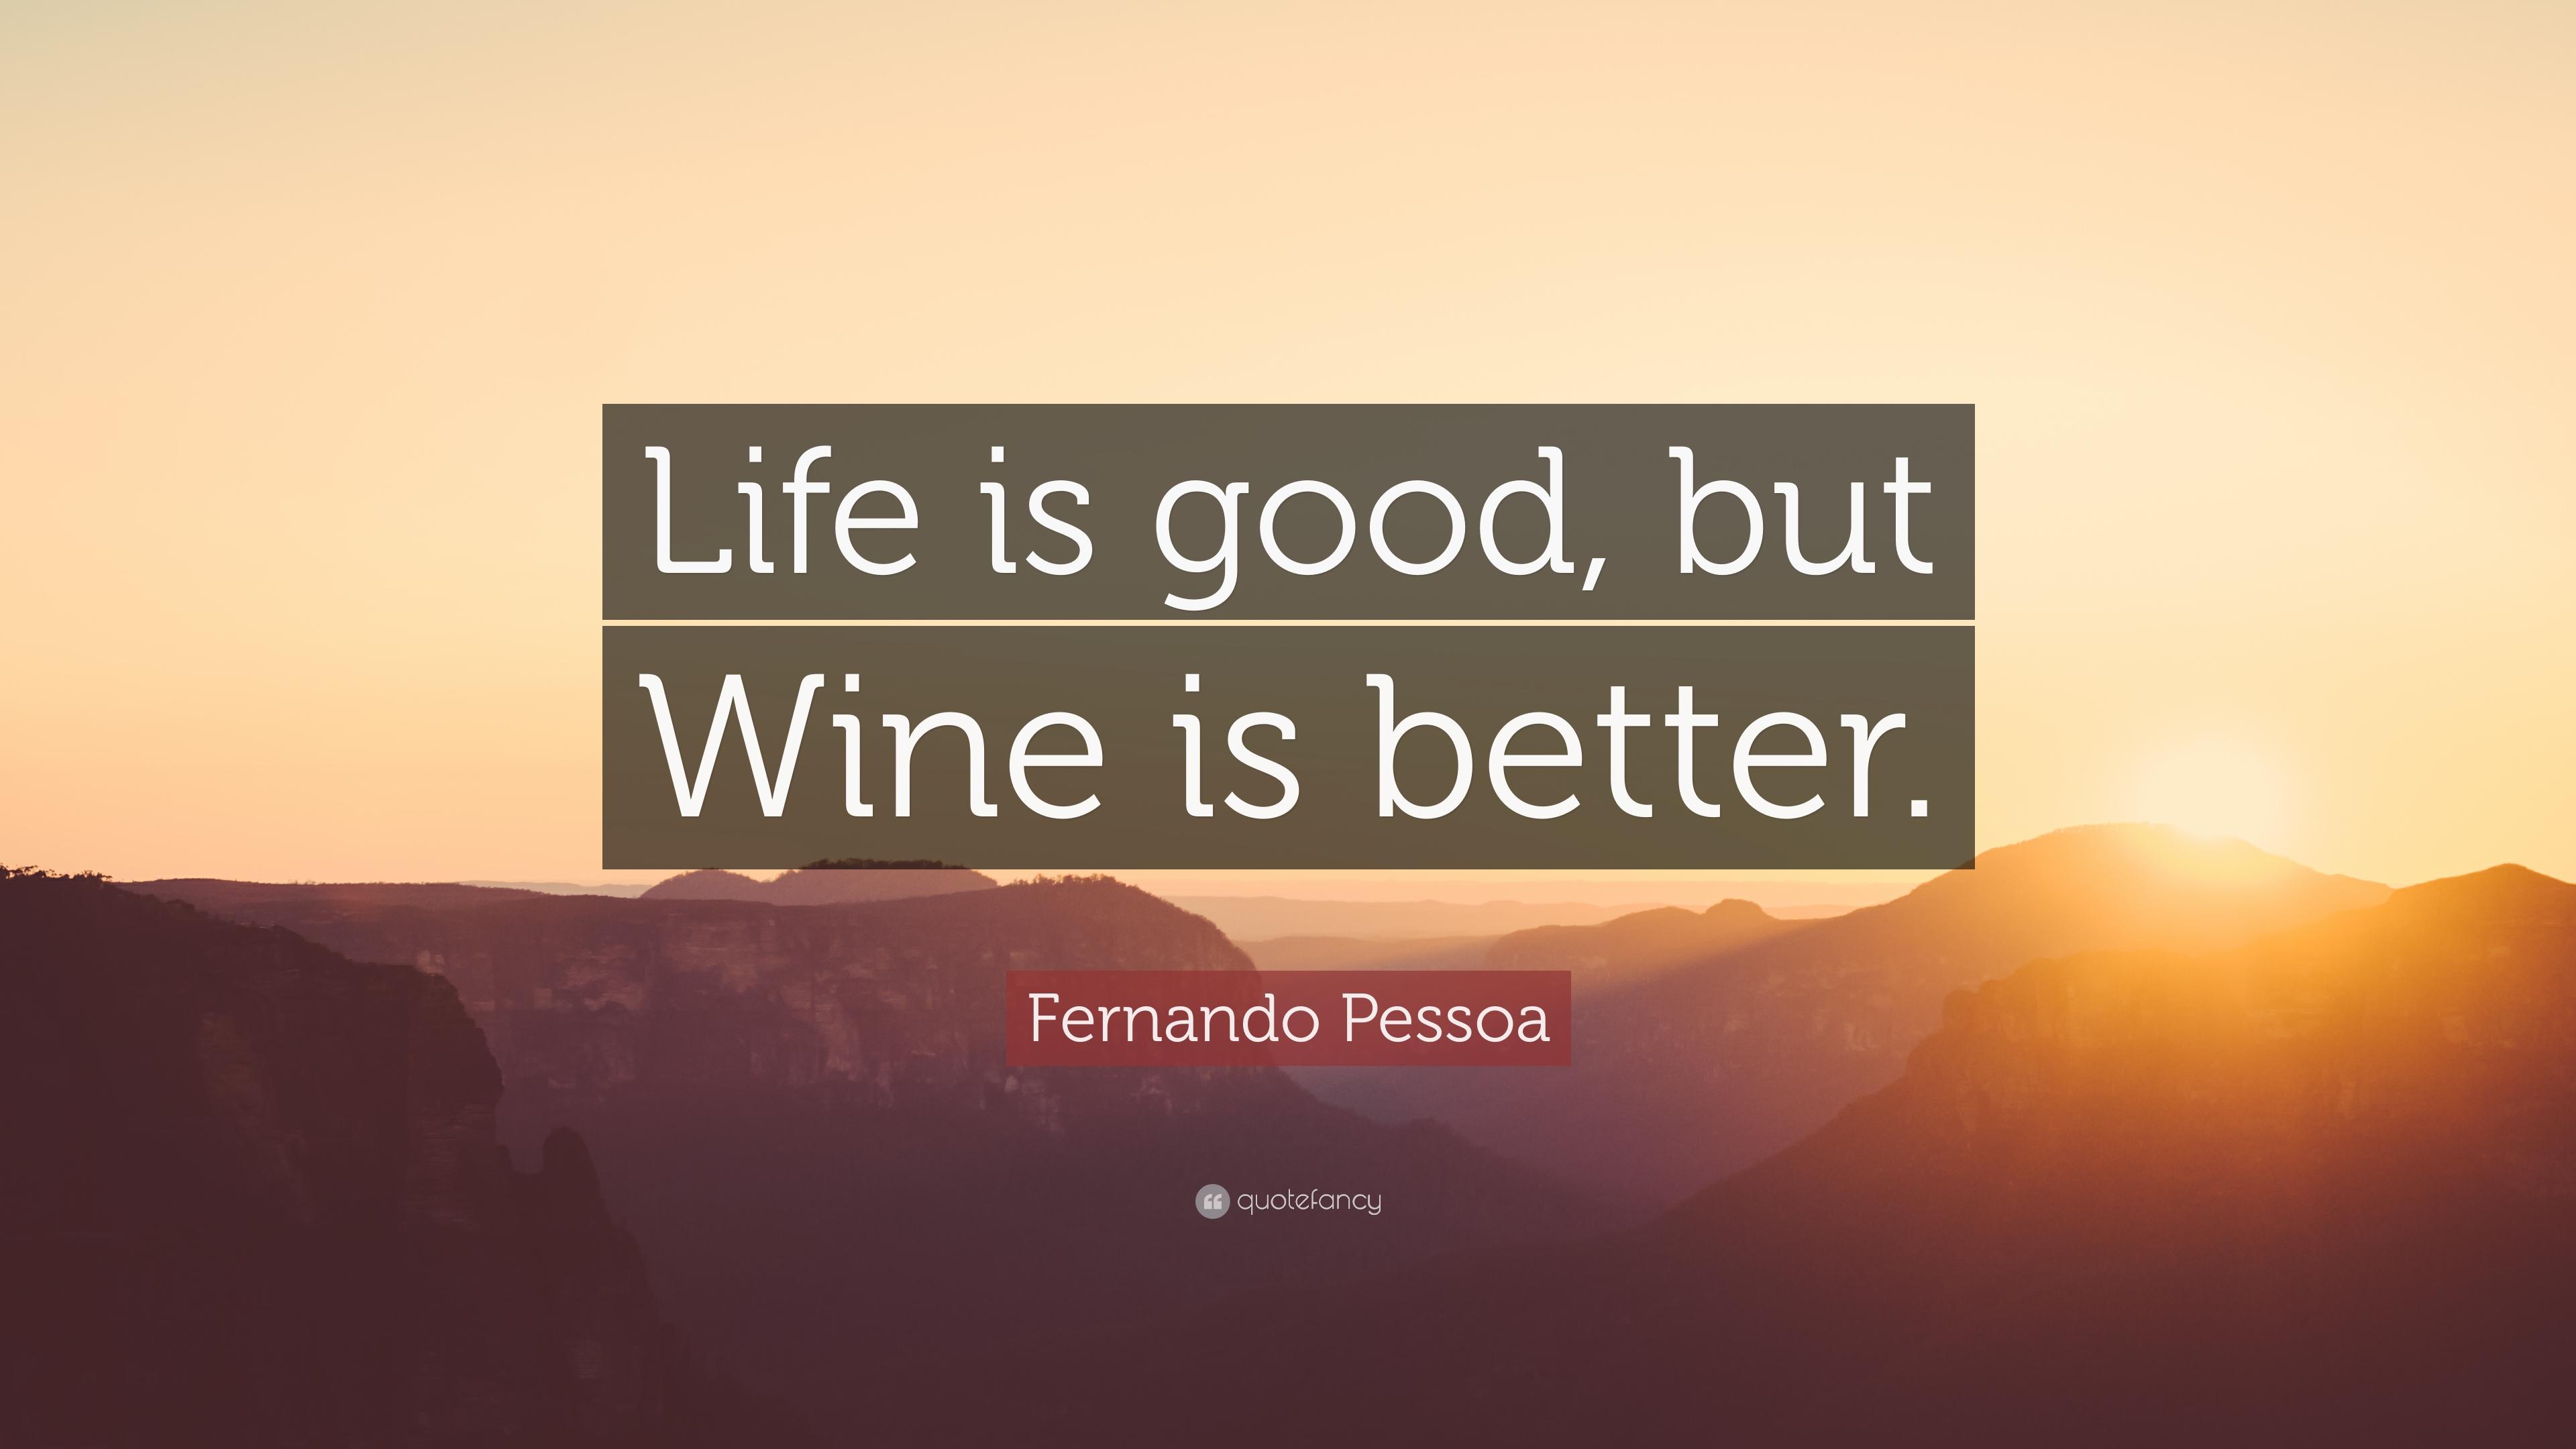 Fernando Pessoa Quote: “Life is good, but Wine is better.” (12 wallpaper)